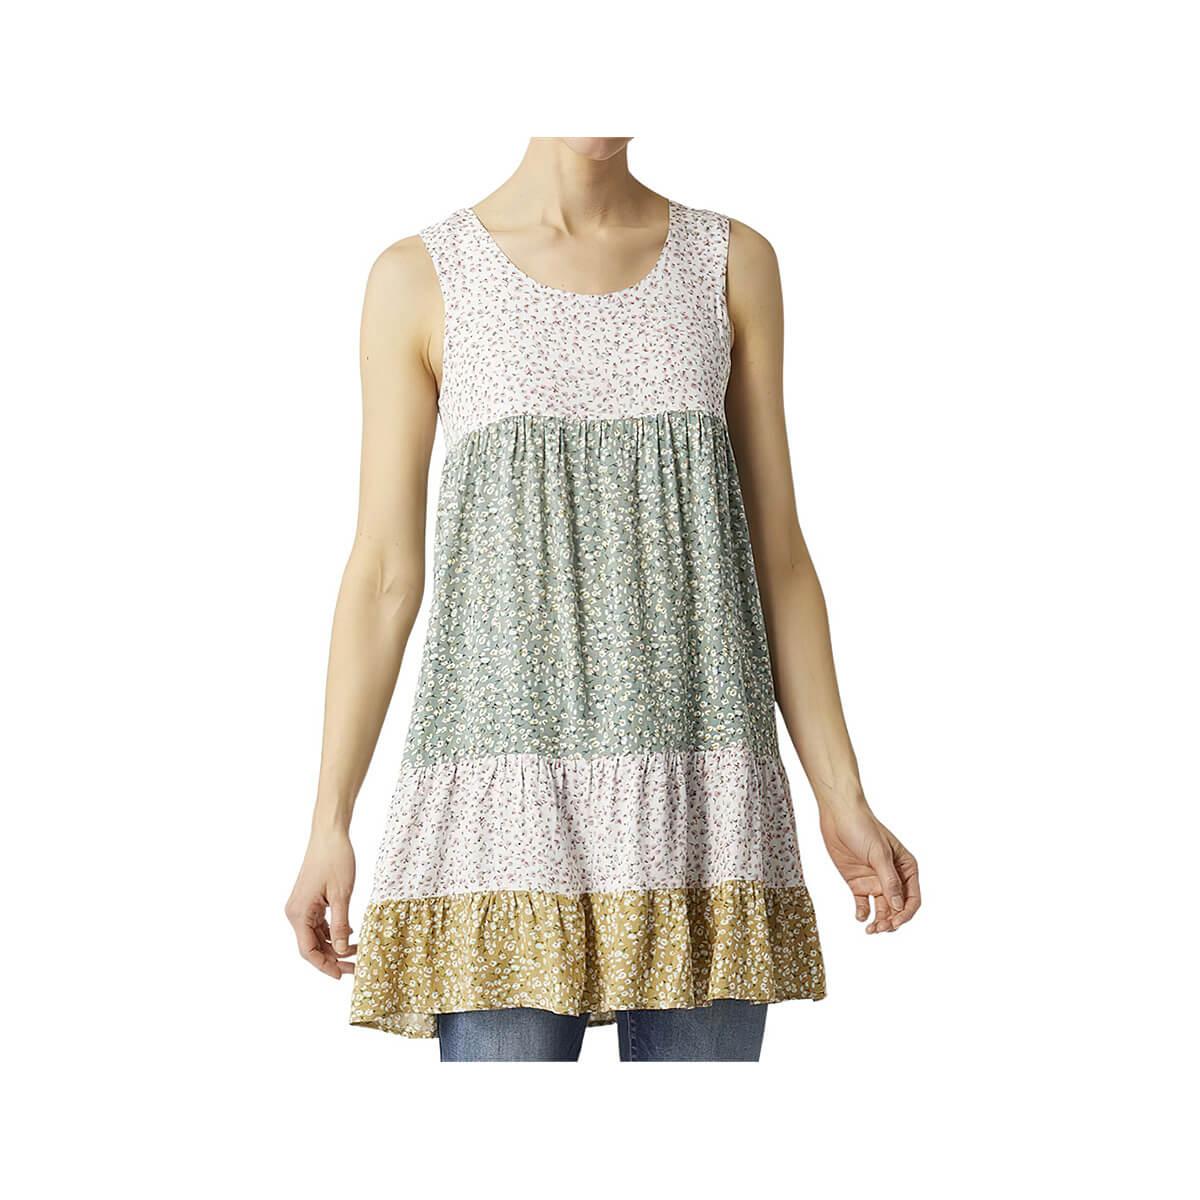  Women's Jessie Patchwork Floral Sleeveless Tunic Top